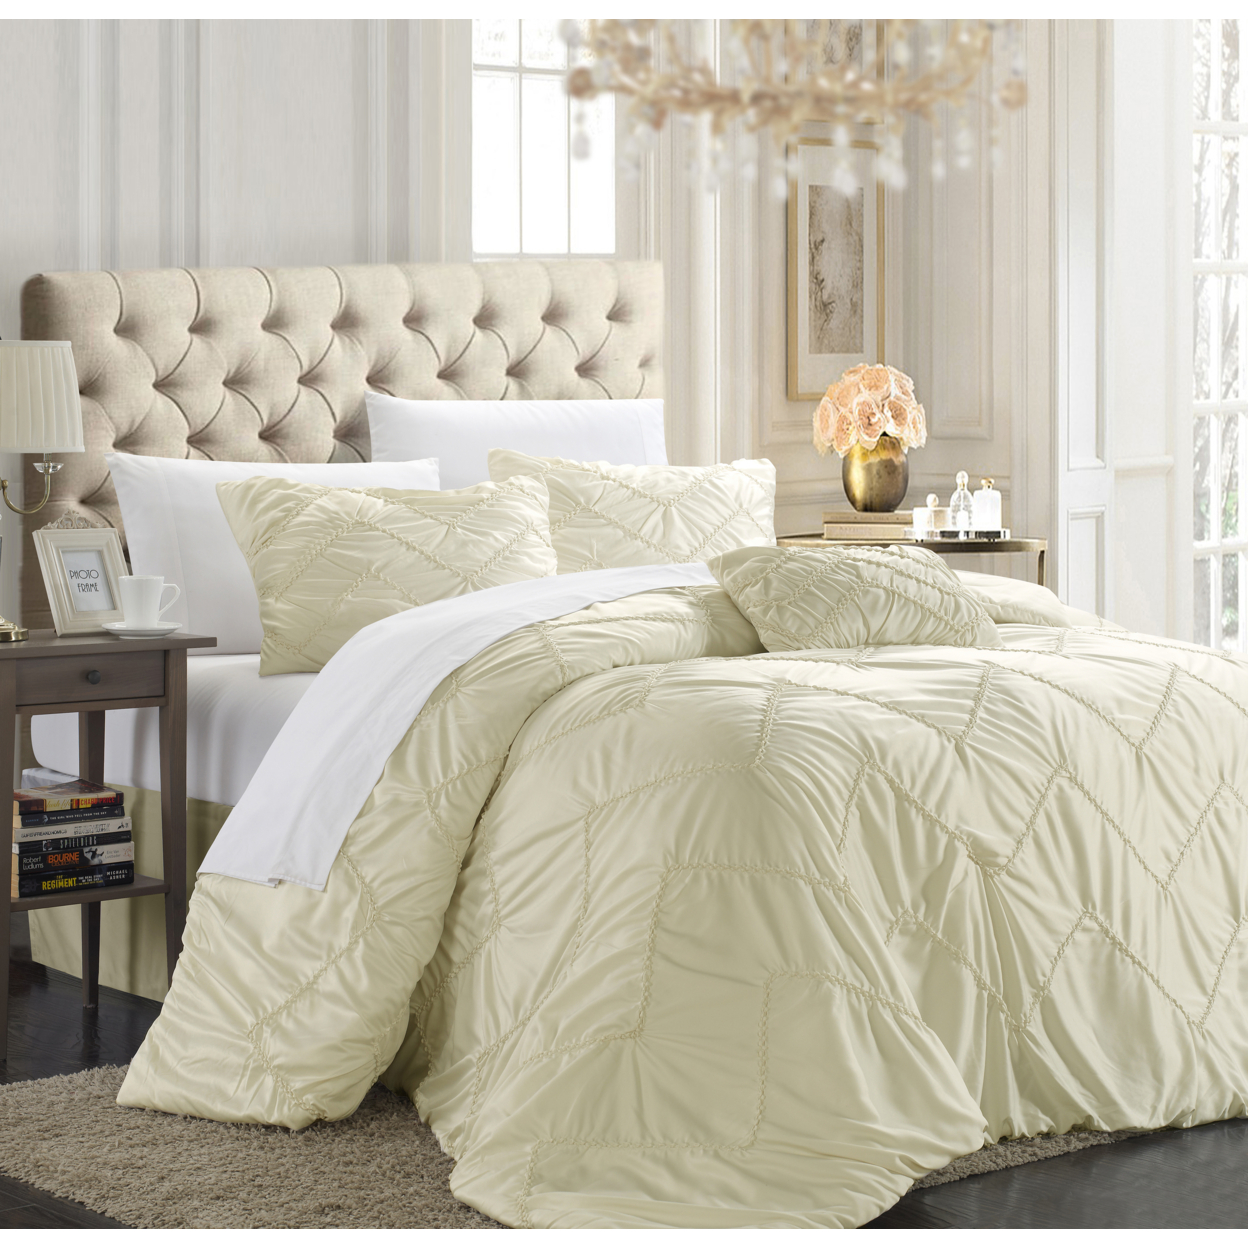 Chic Home Ella 5-piece Comforter Set, Shams, Bed Skirt And Decorative Pillow Included - Beige, Queen